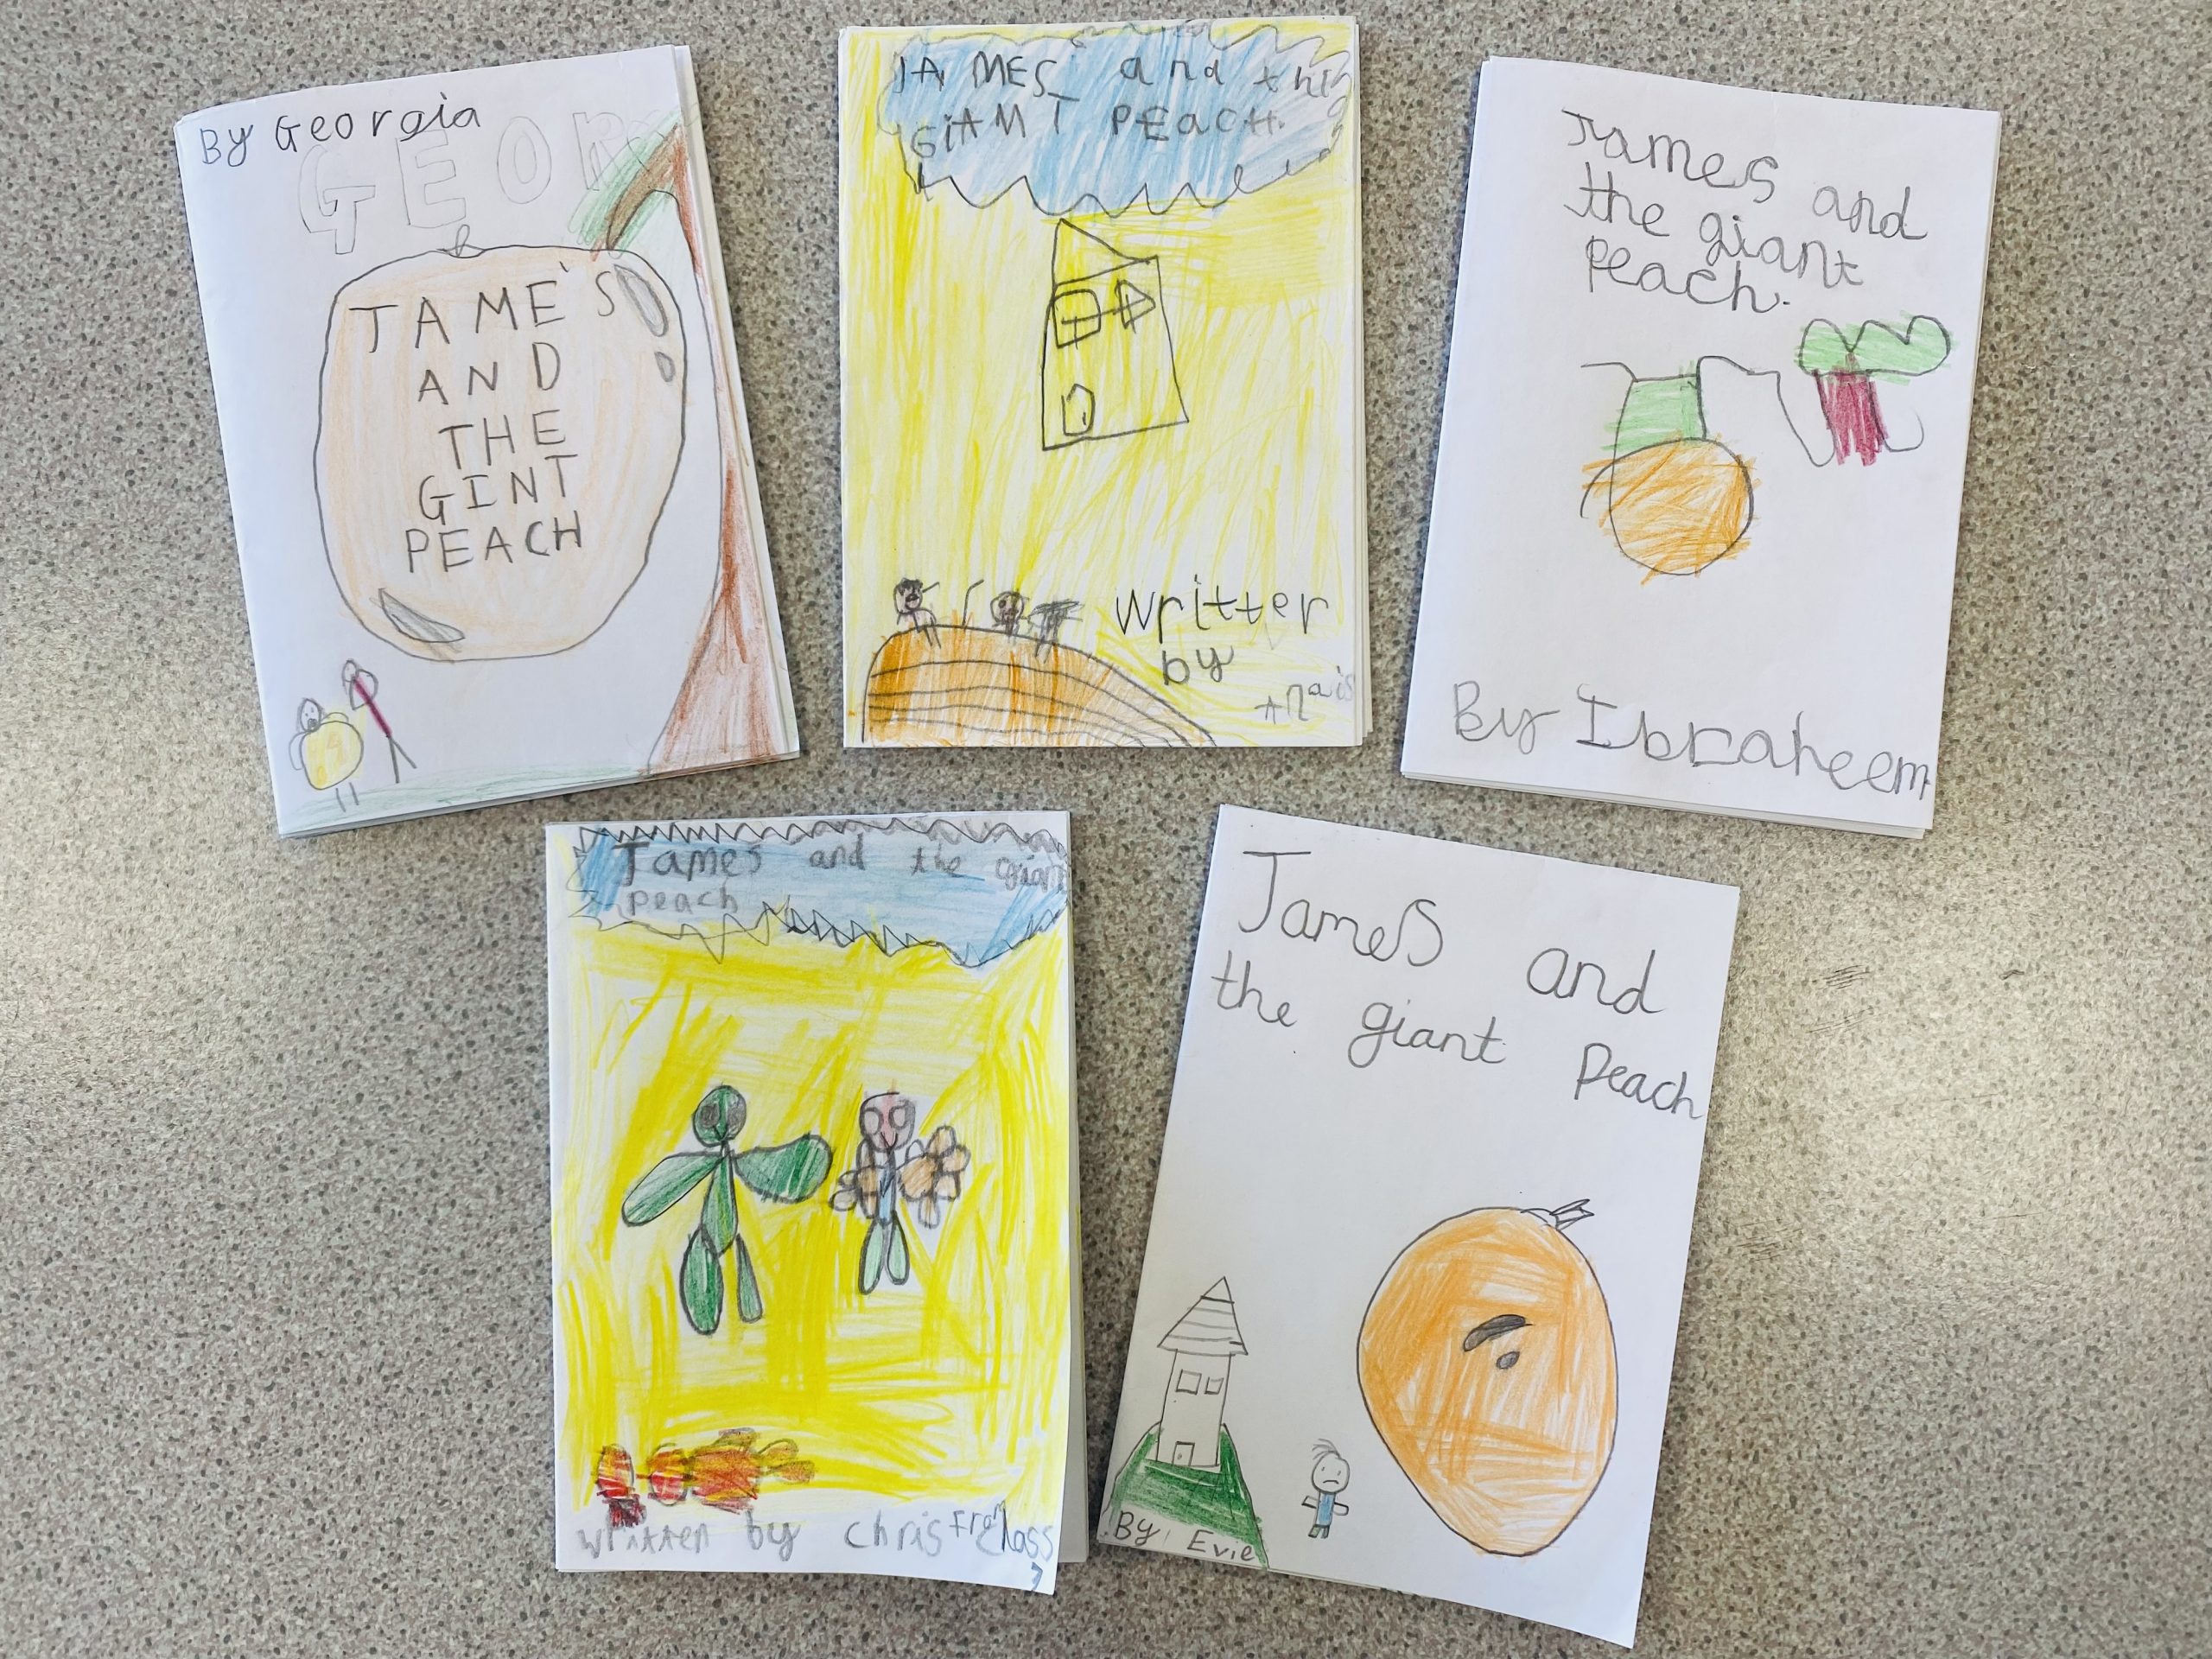 Year 3's mini books of James and the Giant Peach